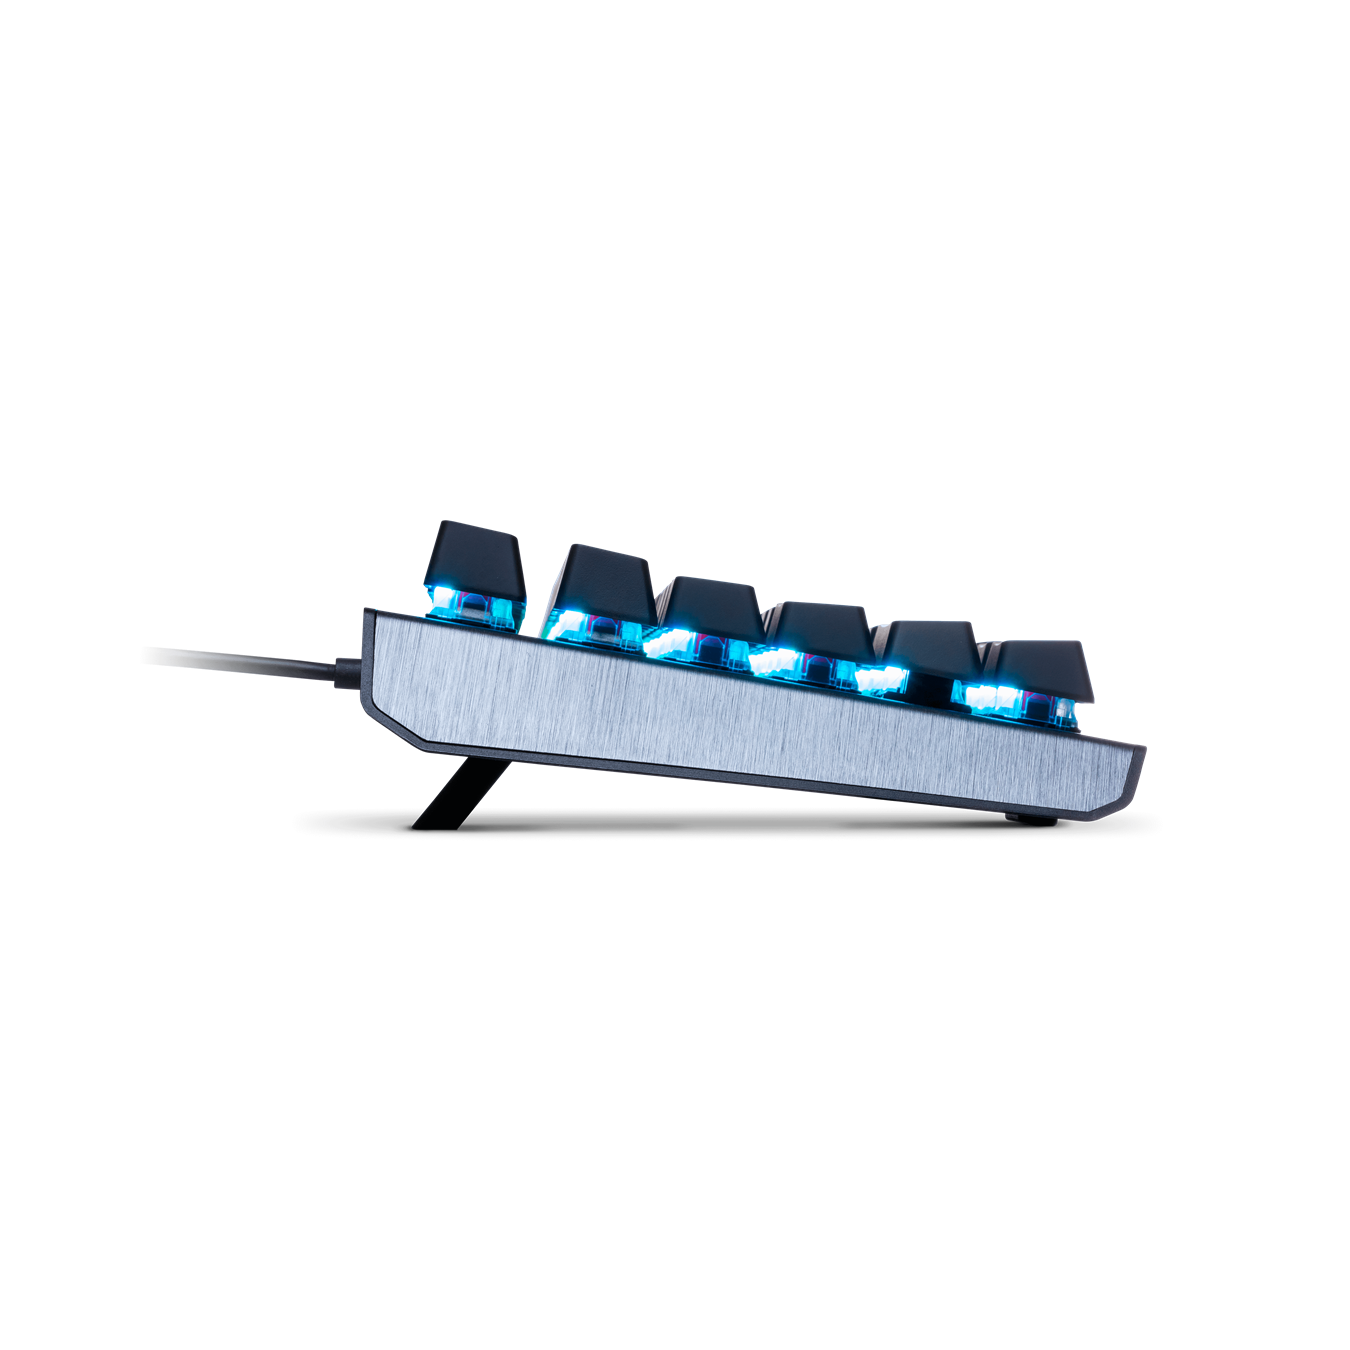 CK530 Mechanical Gaming Keyboard - With automatic switching between 6KRO and NKRO to ensure legacy compatibilty and that always every press is registered